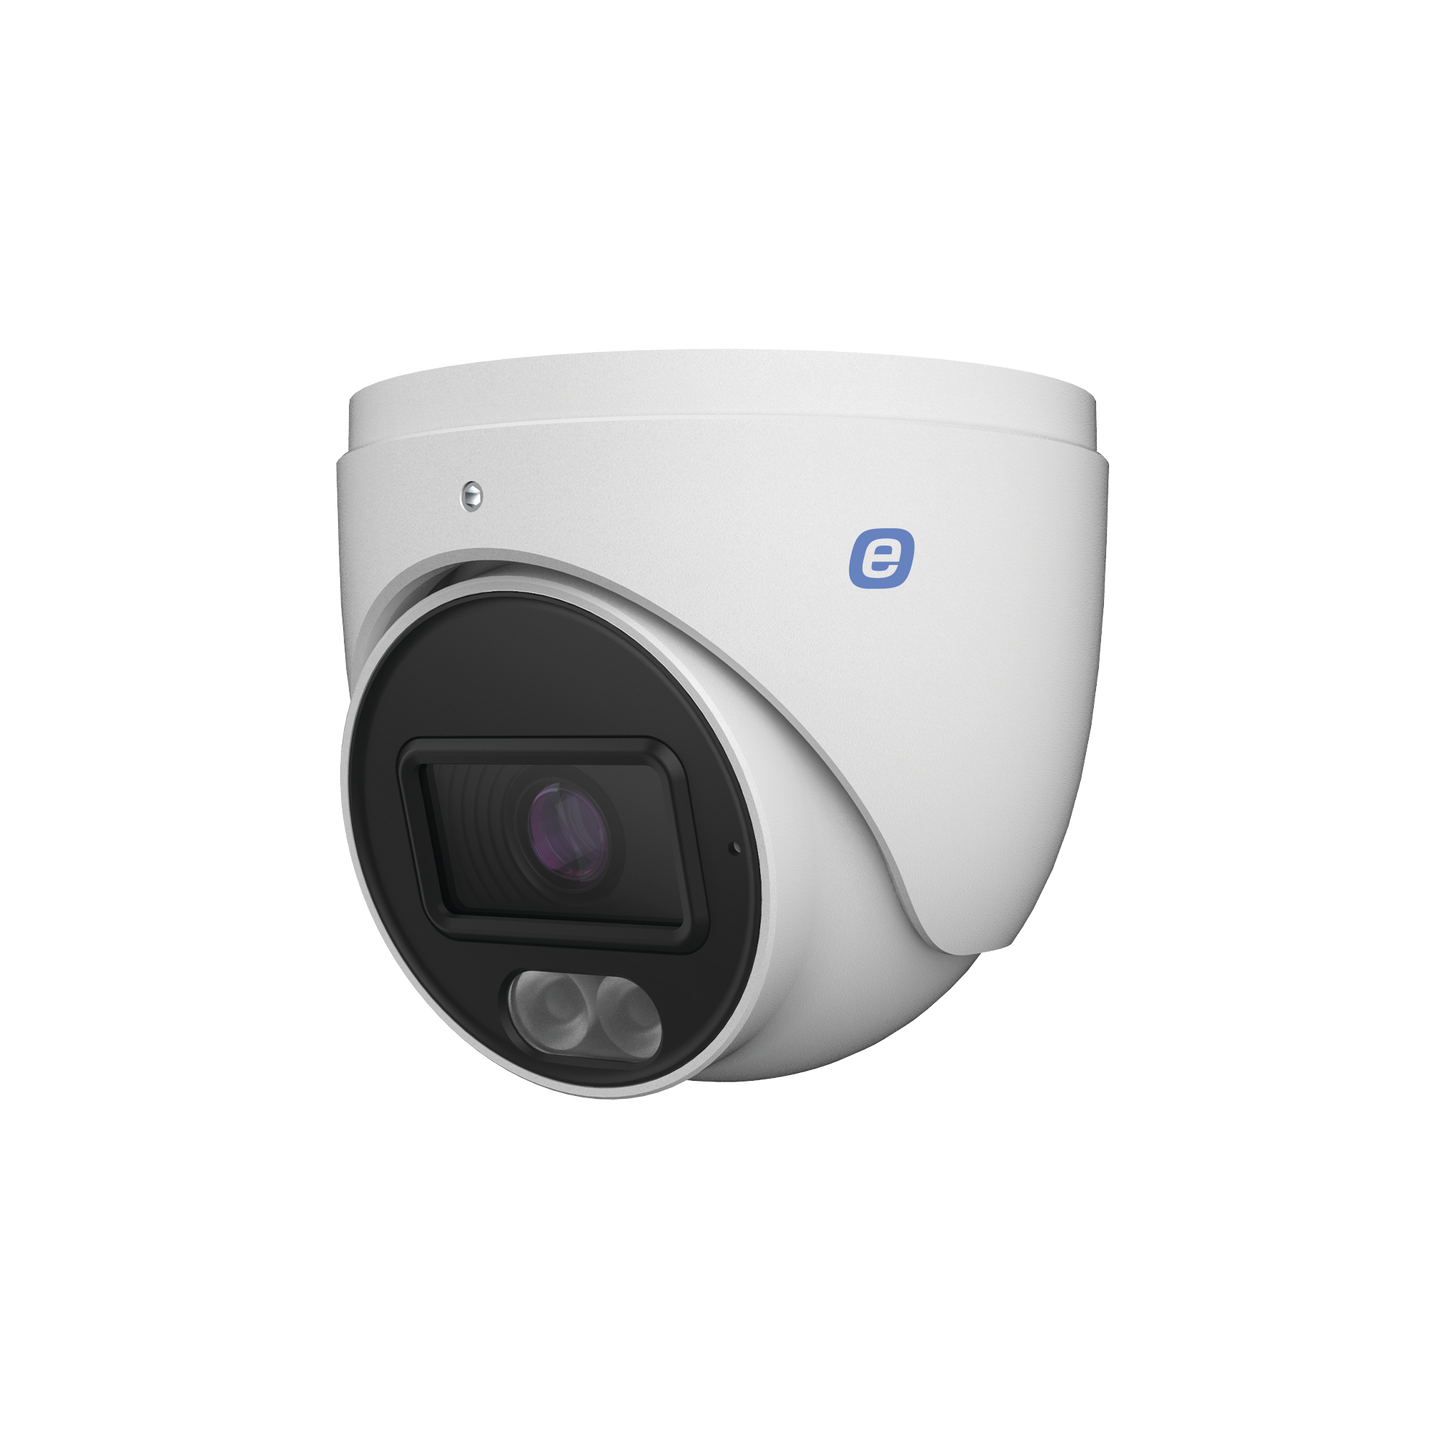 Turret IP 2 MP / 24/7 Color Image / POE / White Light 98ft (30m) / WDR / Micro SD / IP67 / 2.8 mm Lens / Built-In Microphone / Cloud Video Recording / Metal Housing